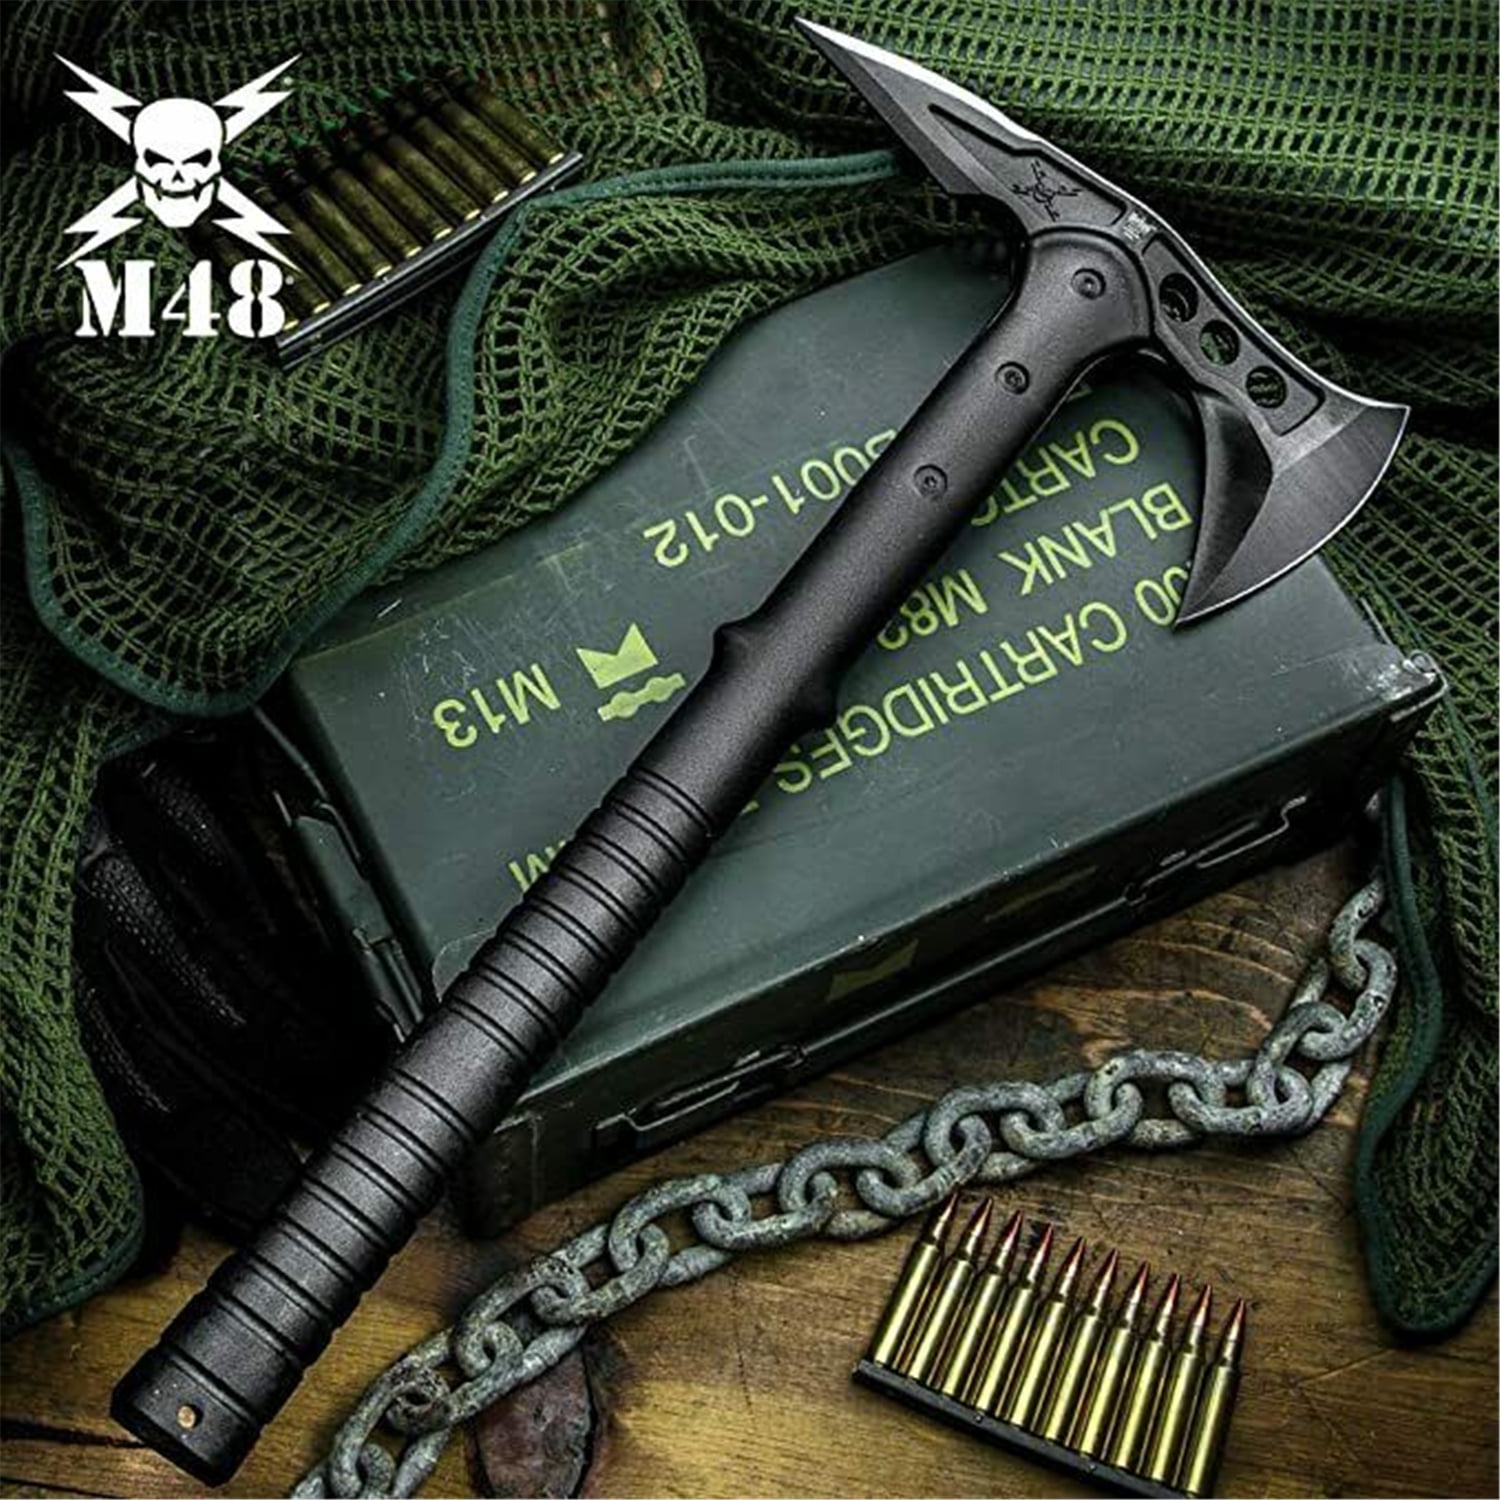 Outdoor Hand Axe Hunting Camping Survival Machete Axes Fire Army Ice Ax Tools 